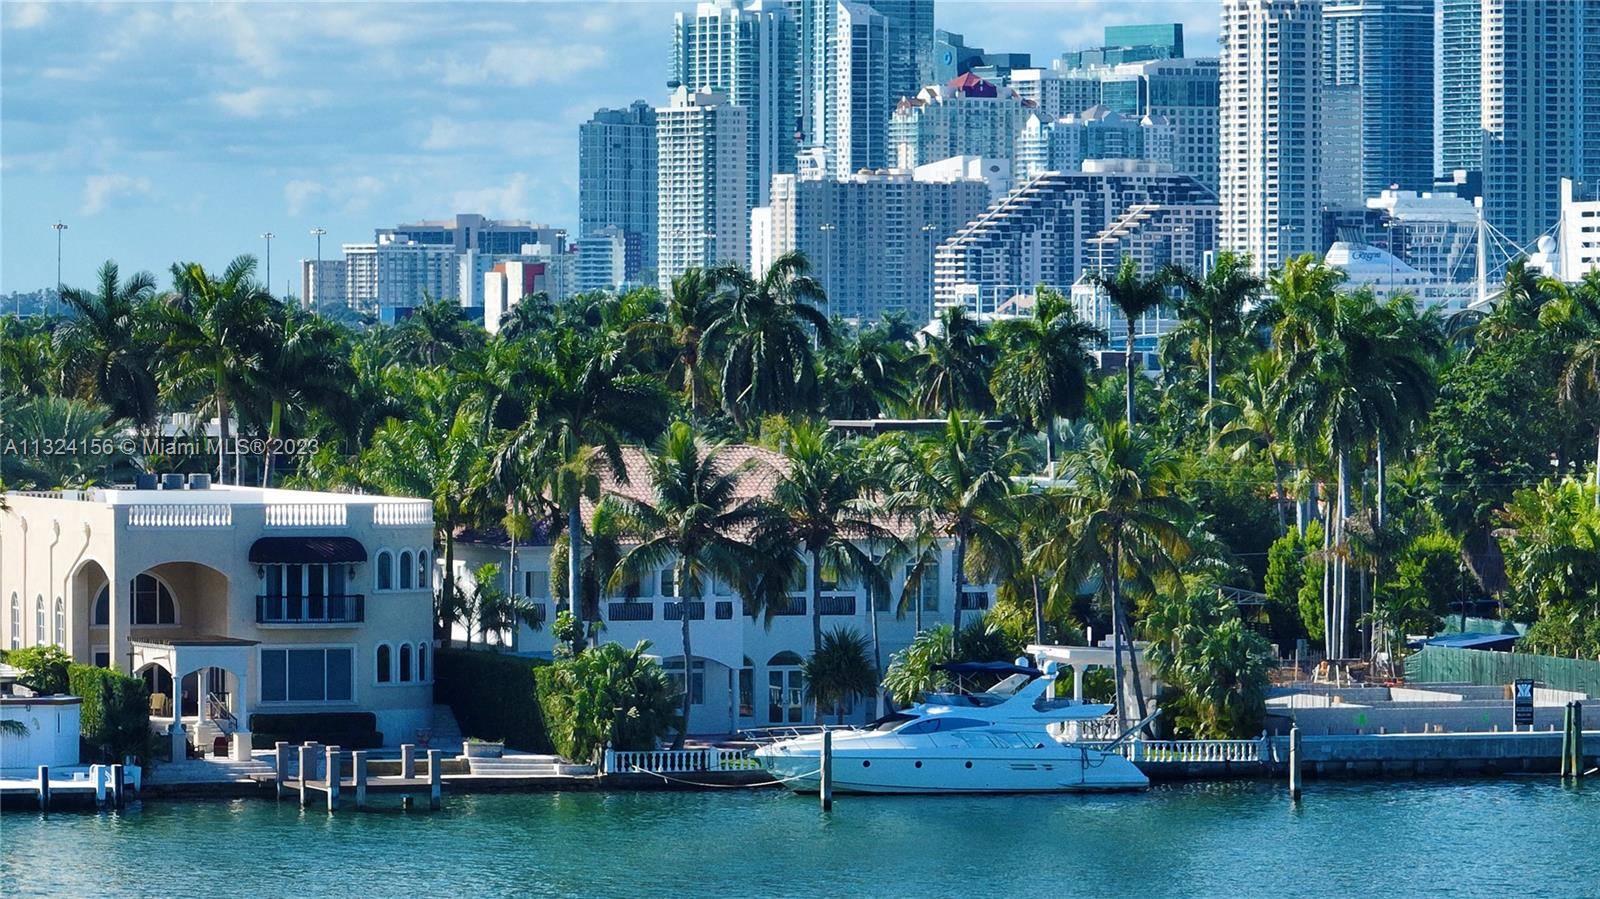 PRIME WATERFRONT ESTATE on the exclusive Hibiscus Island in Miami Beach with over 8, 000 interior SF, 9 bedrooms and 11 bathrooms on a generous 15, 750 SF lot with ...